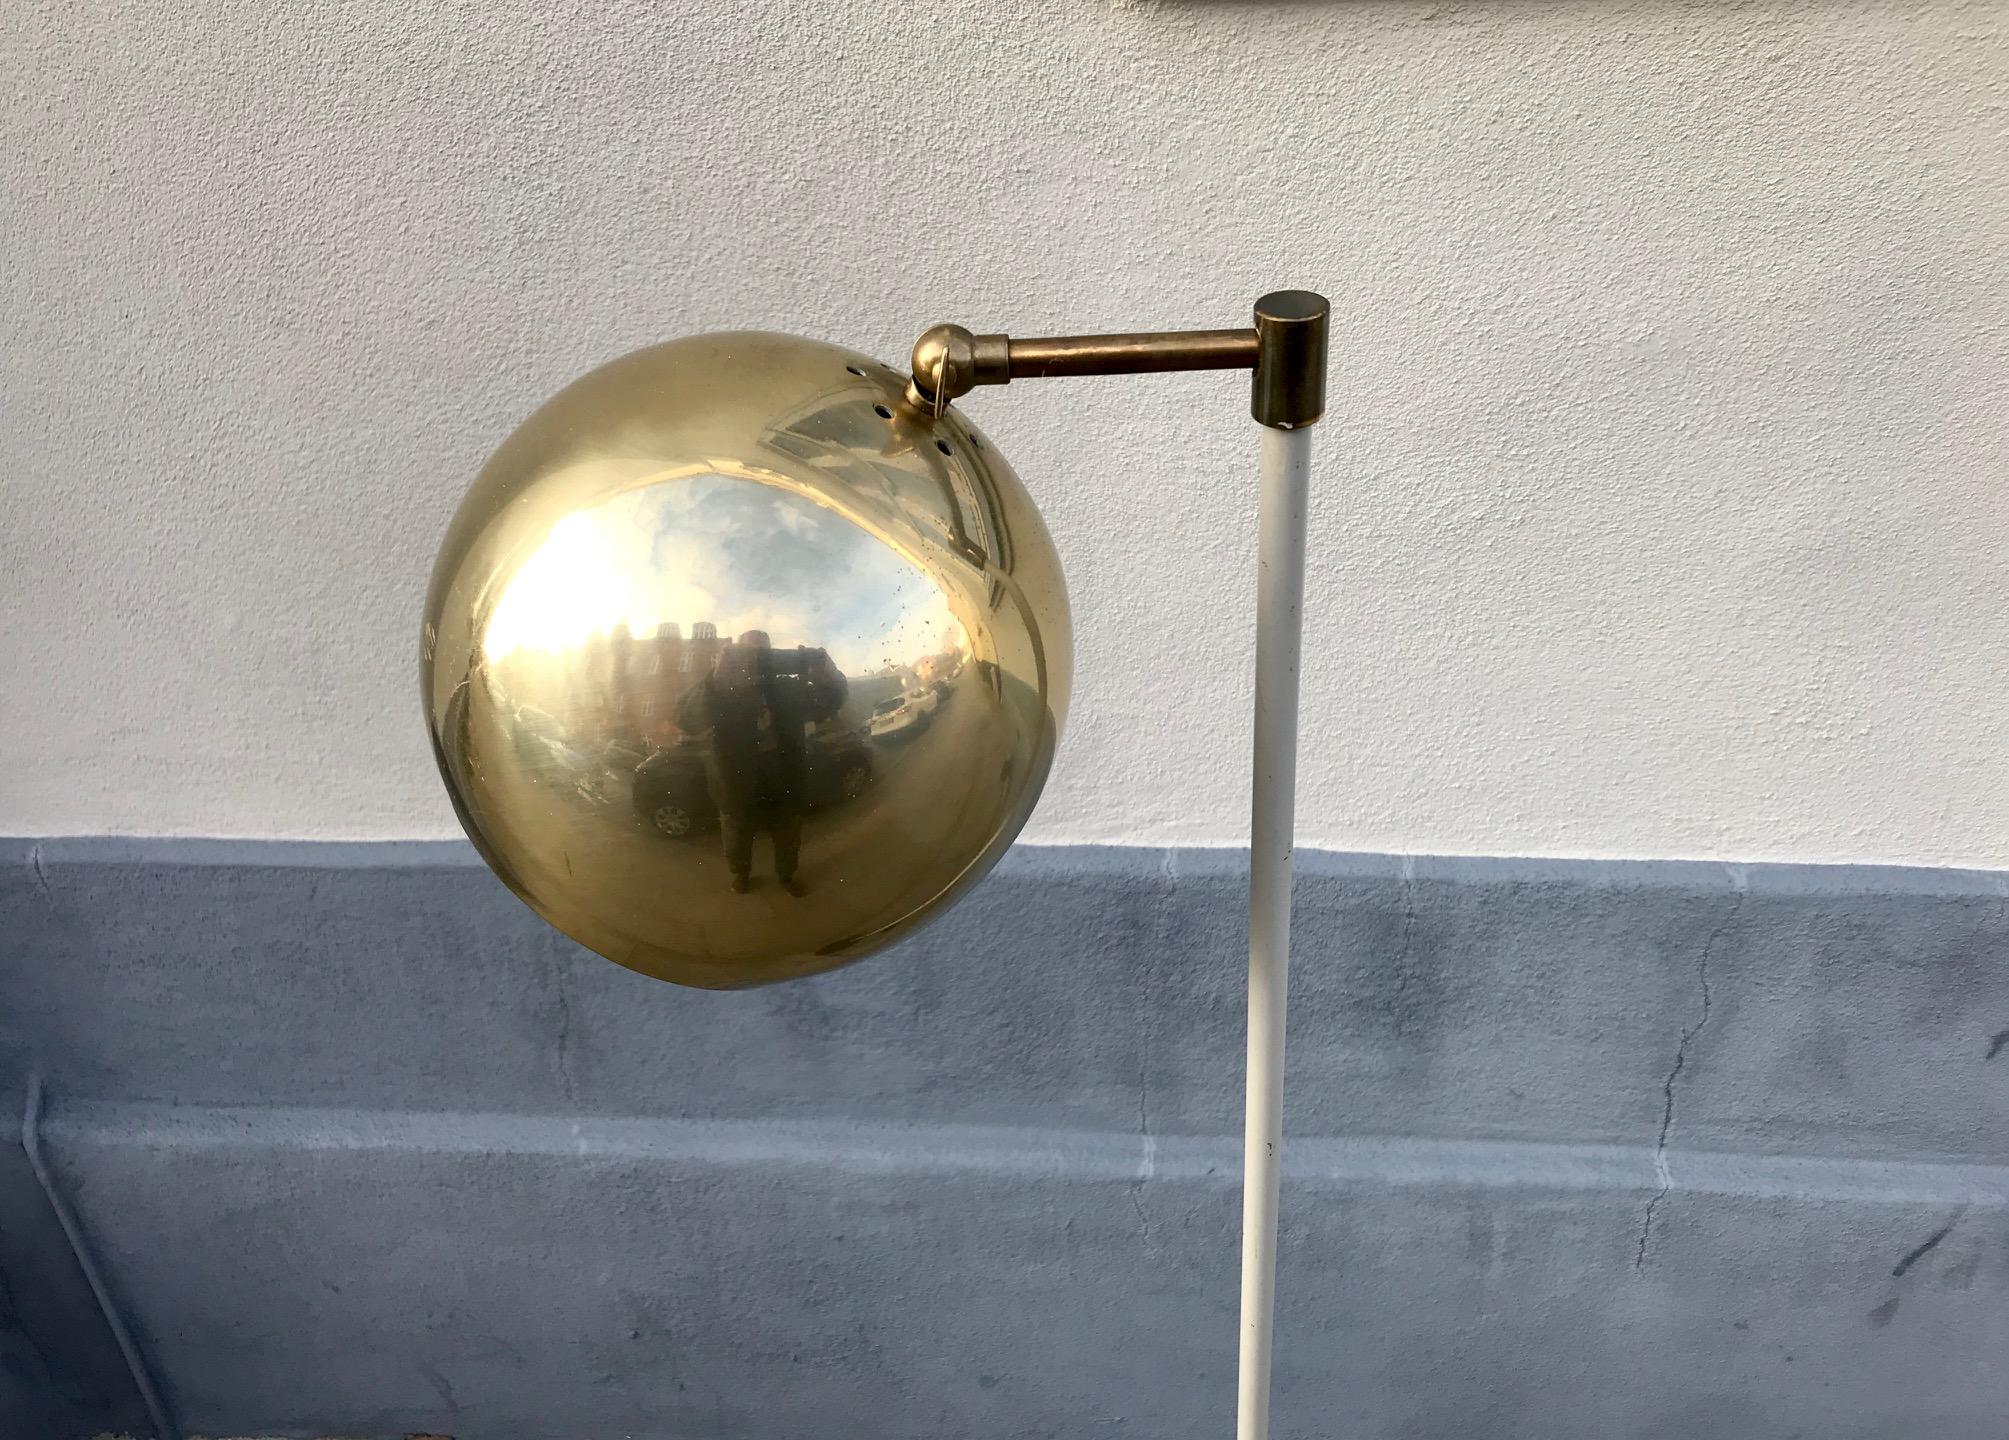 Unusual Scandinavian floor lamp with an adjustable spherical shade in brass. Anonymous maker/design in the style of Verner Panton and Stilnovo. The shade is adjustable up/down and from side to side. Measures: Height 125 cm. Shade diameter 20 cm.